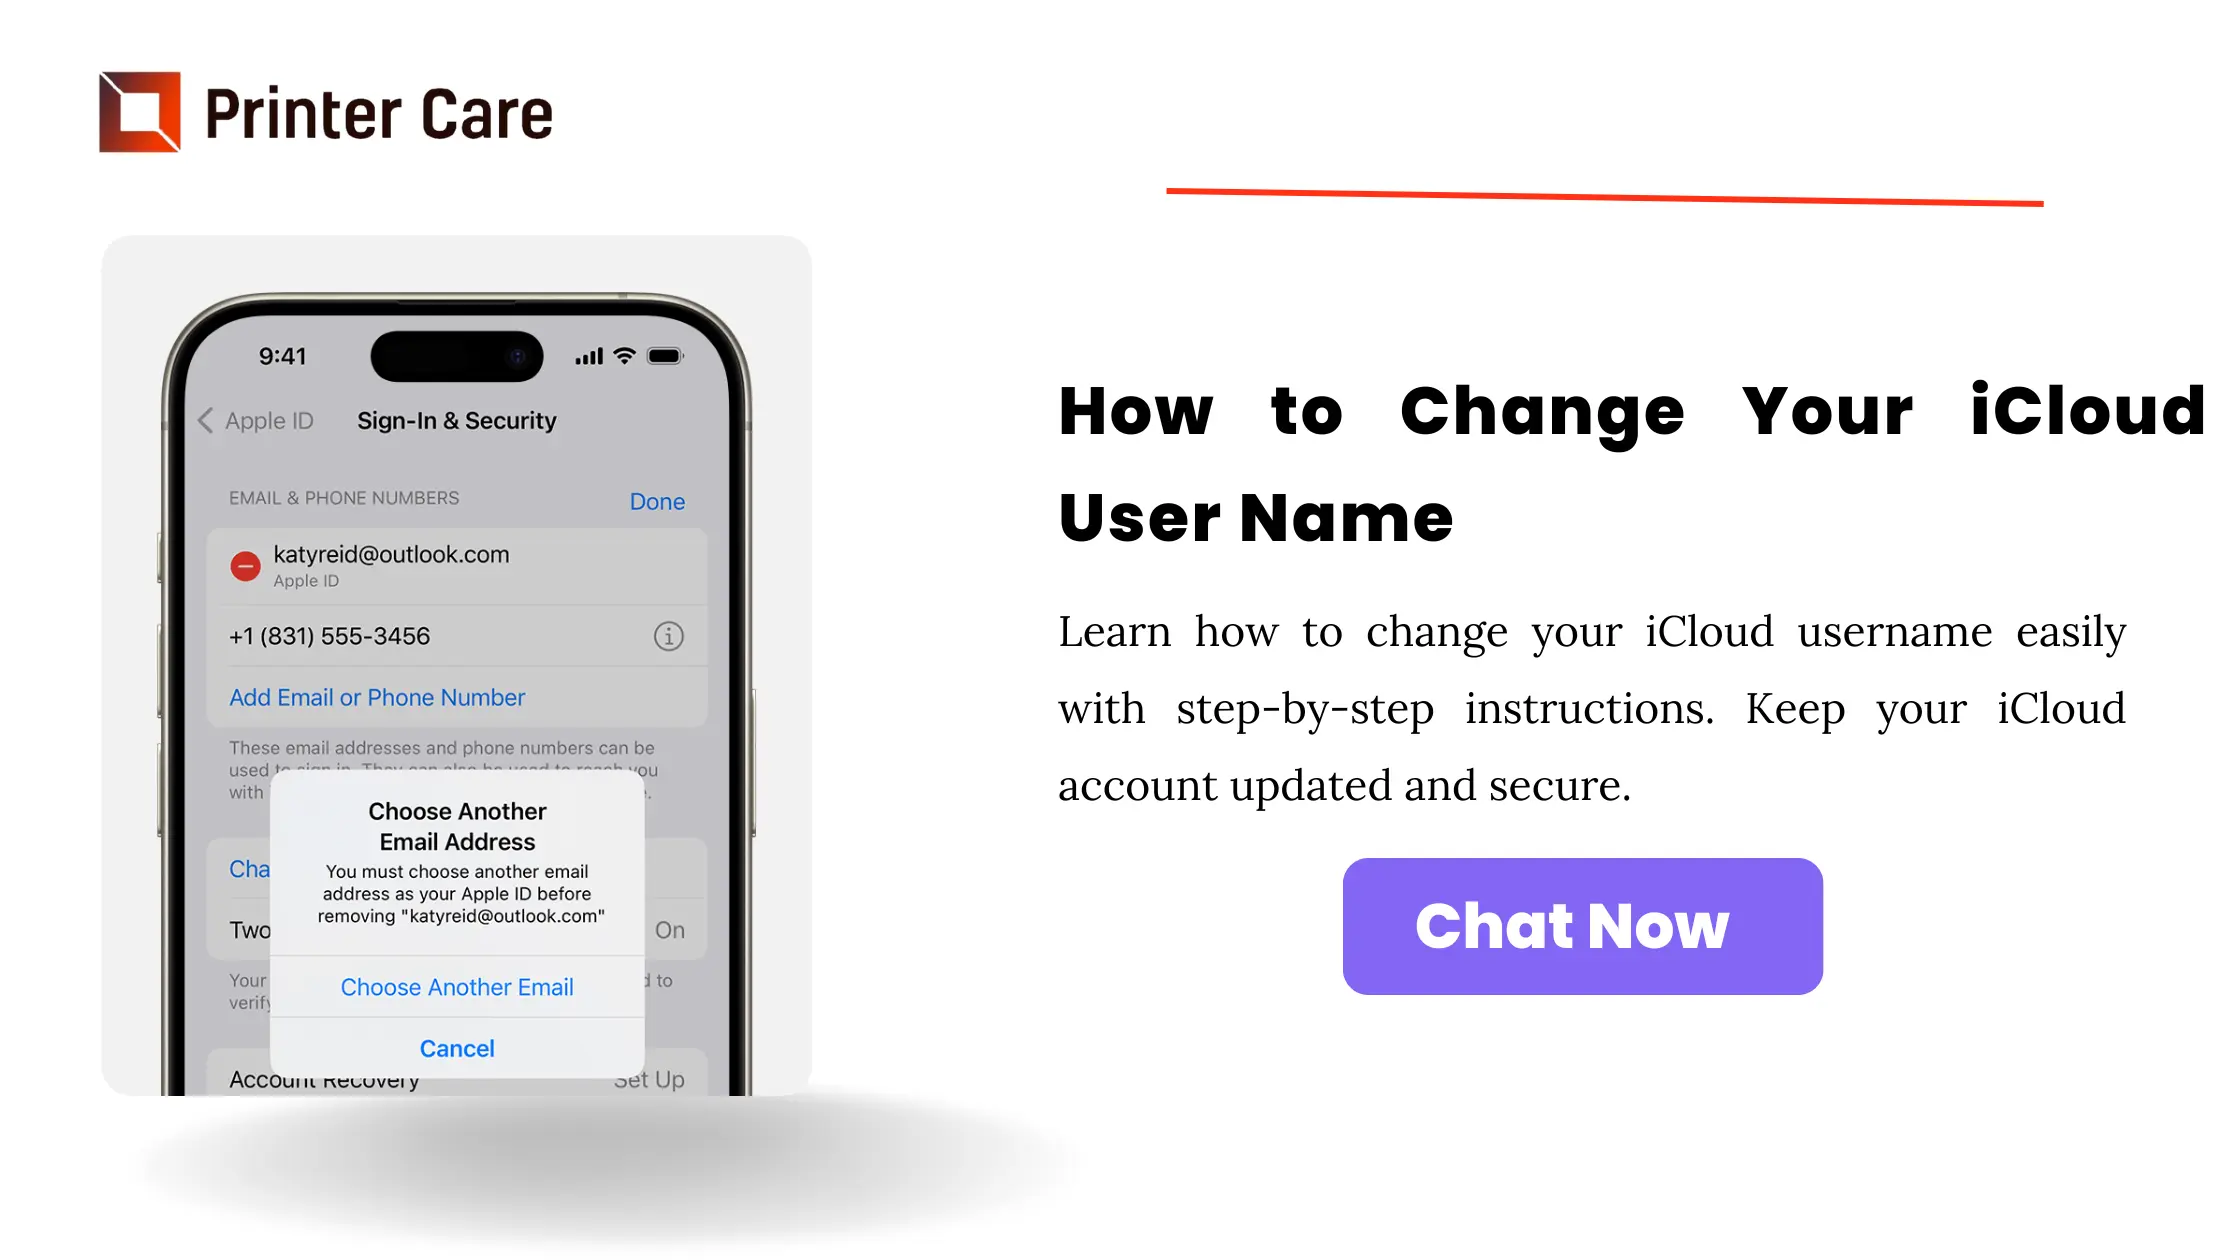 How to Change Your iCloud User Name